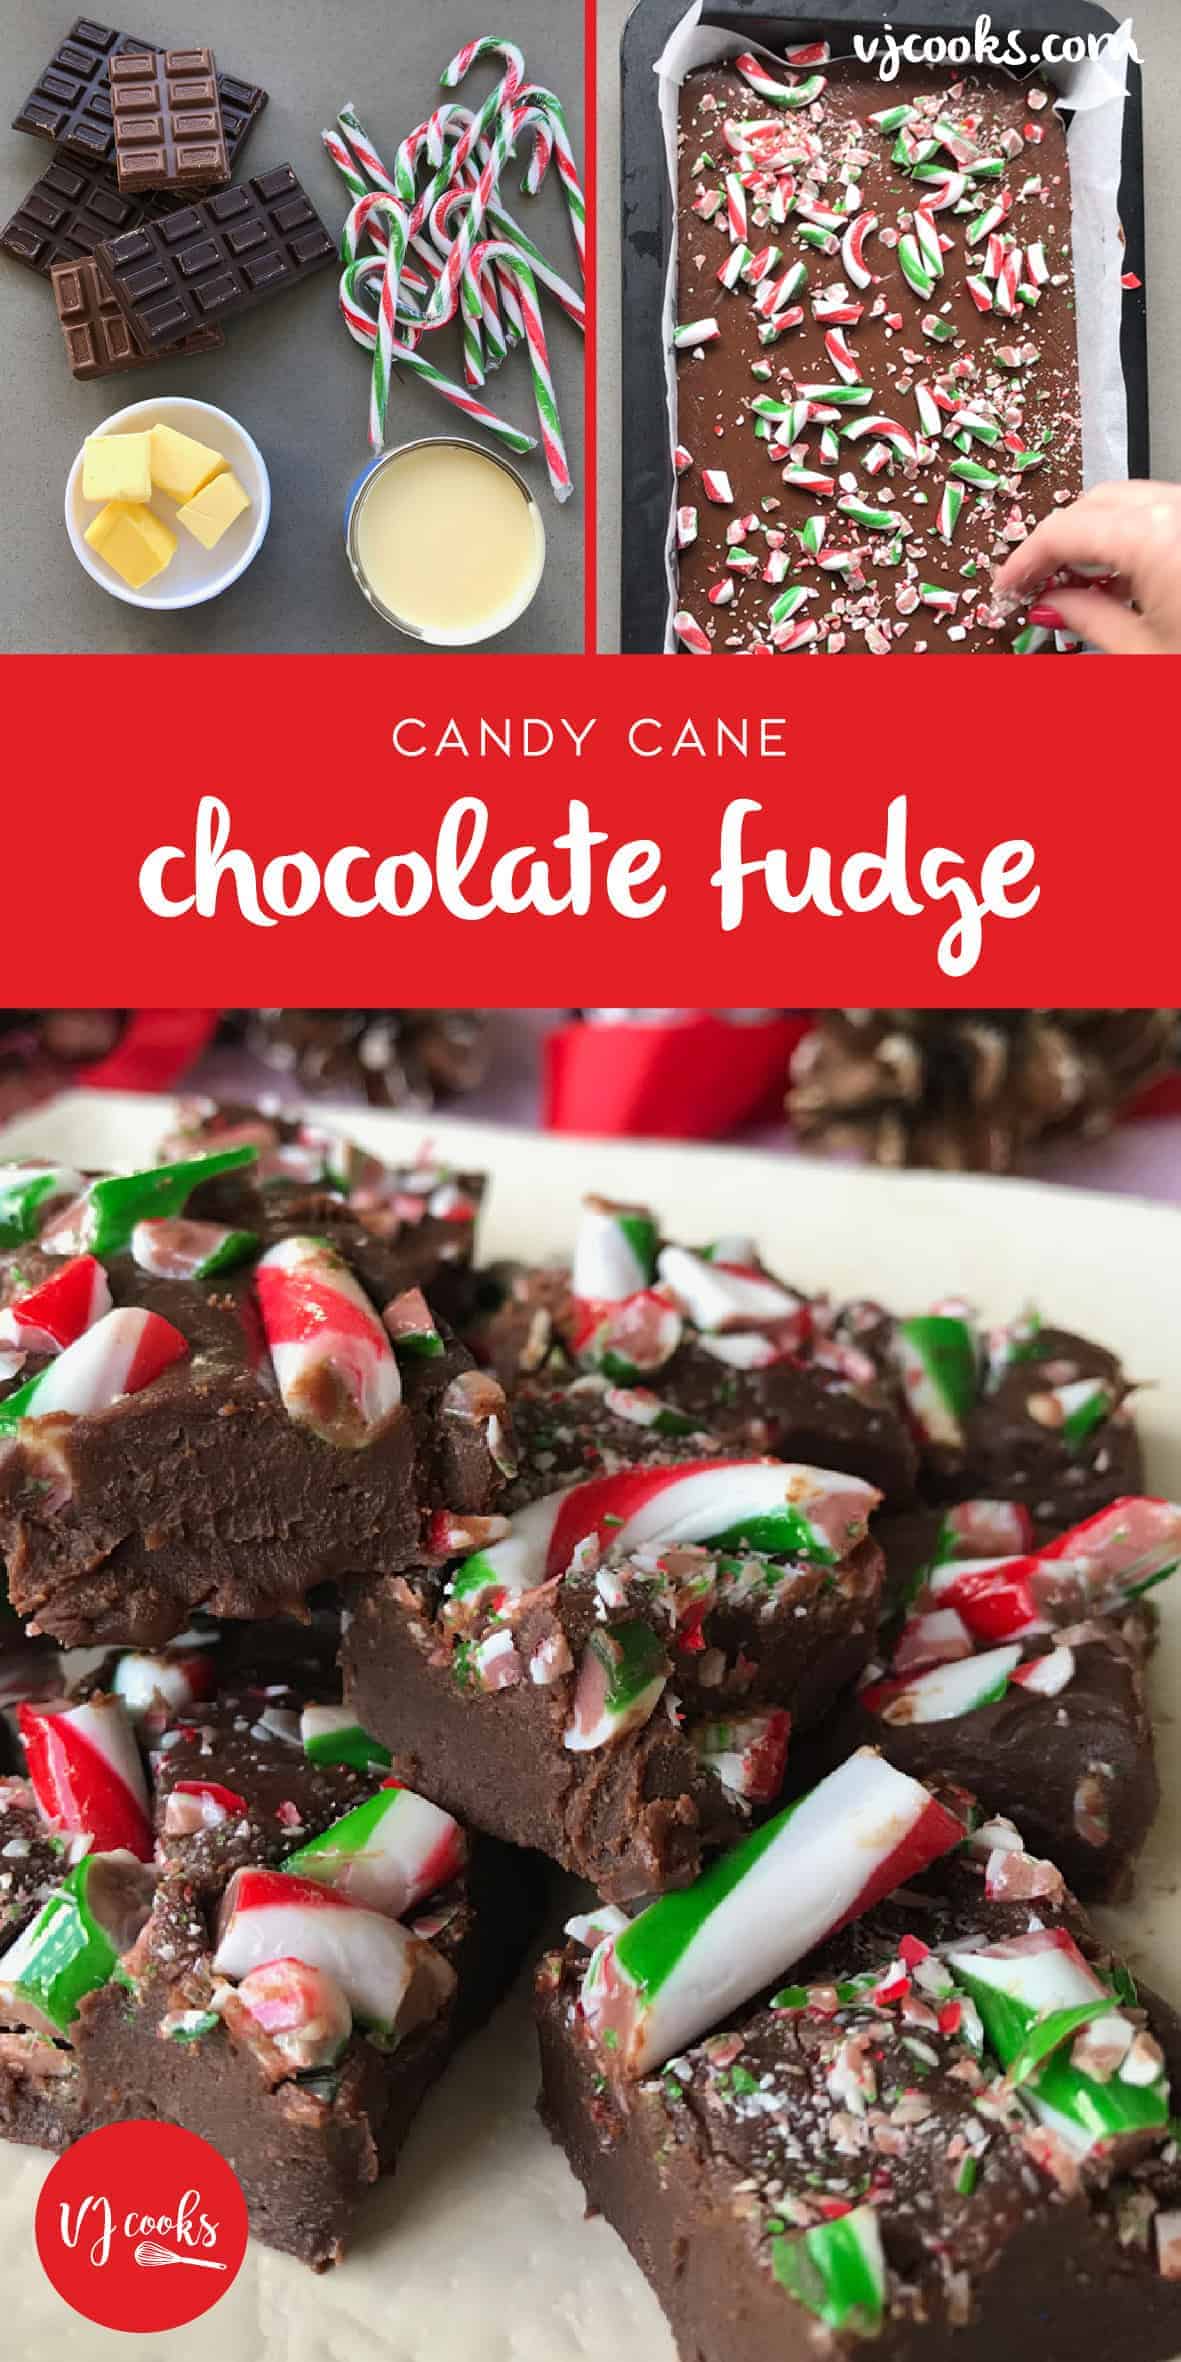 Candy cane chocolate fudge by VJ COOKS